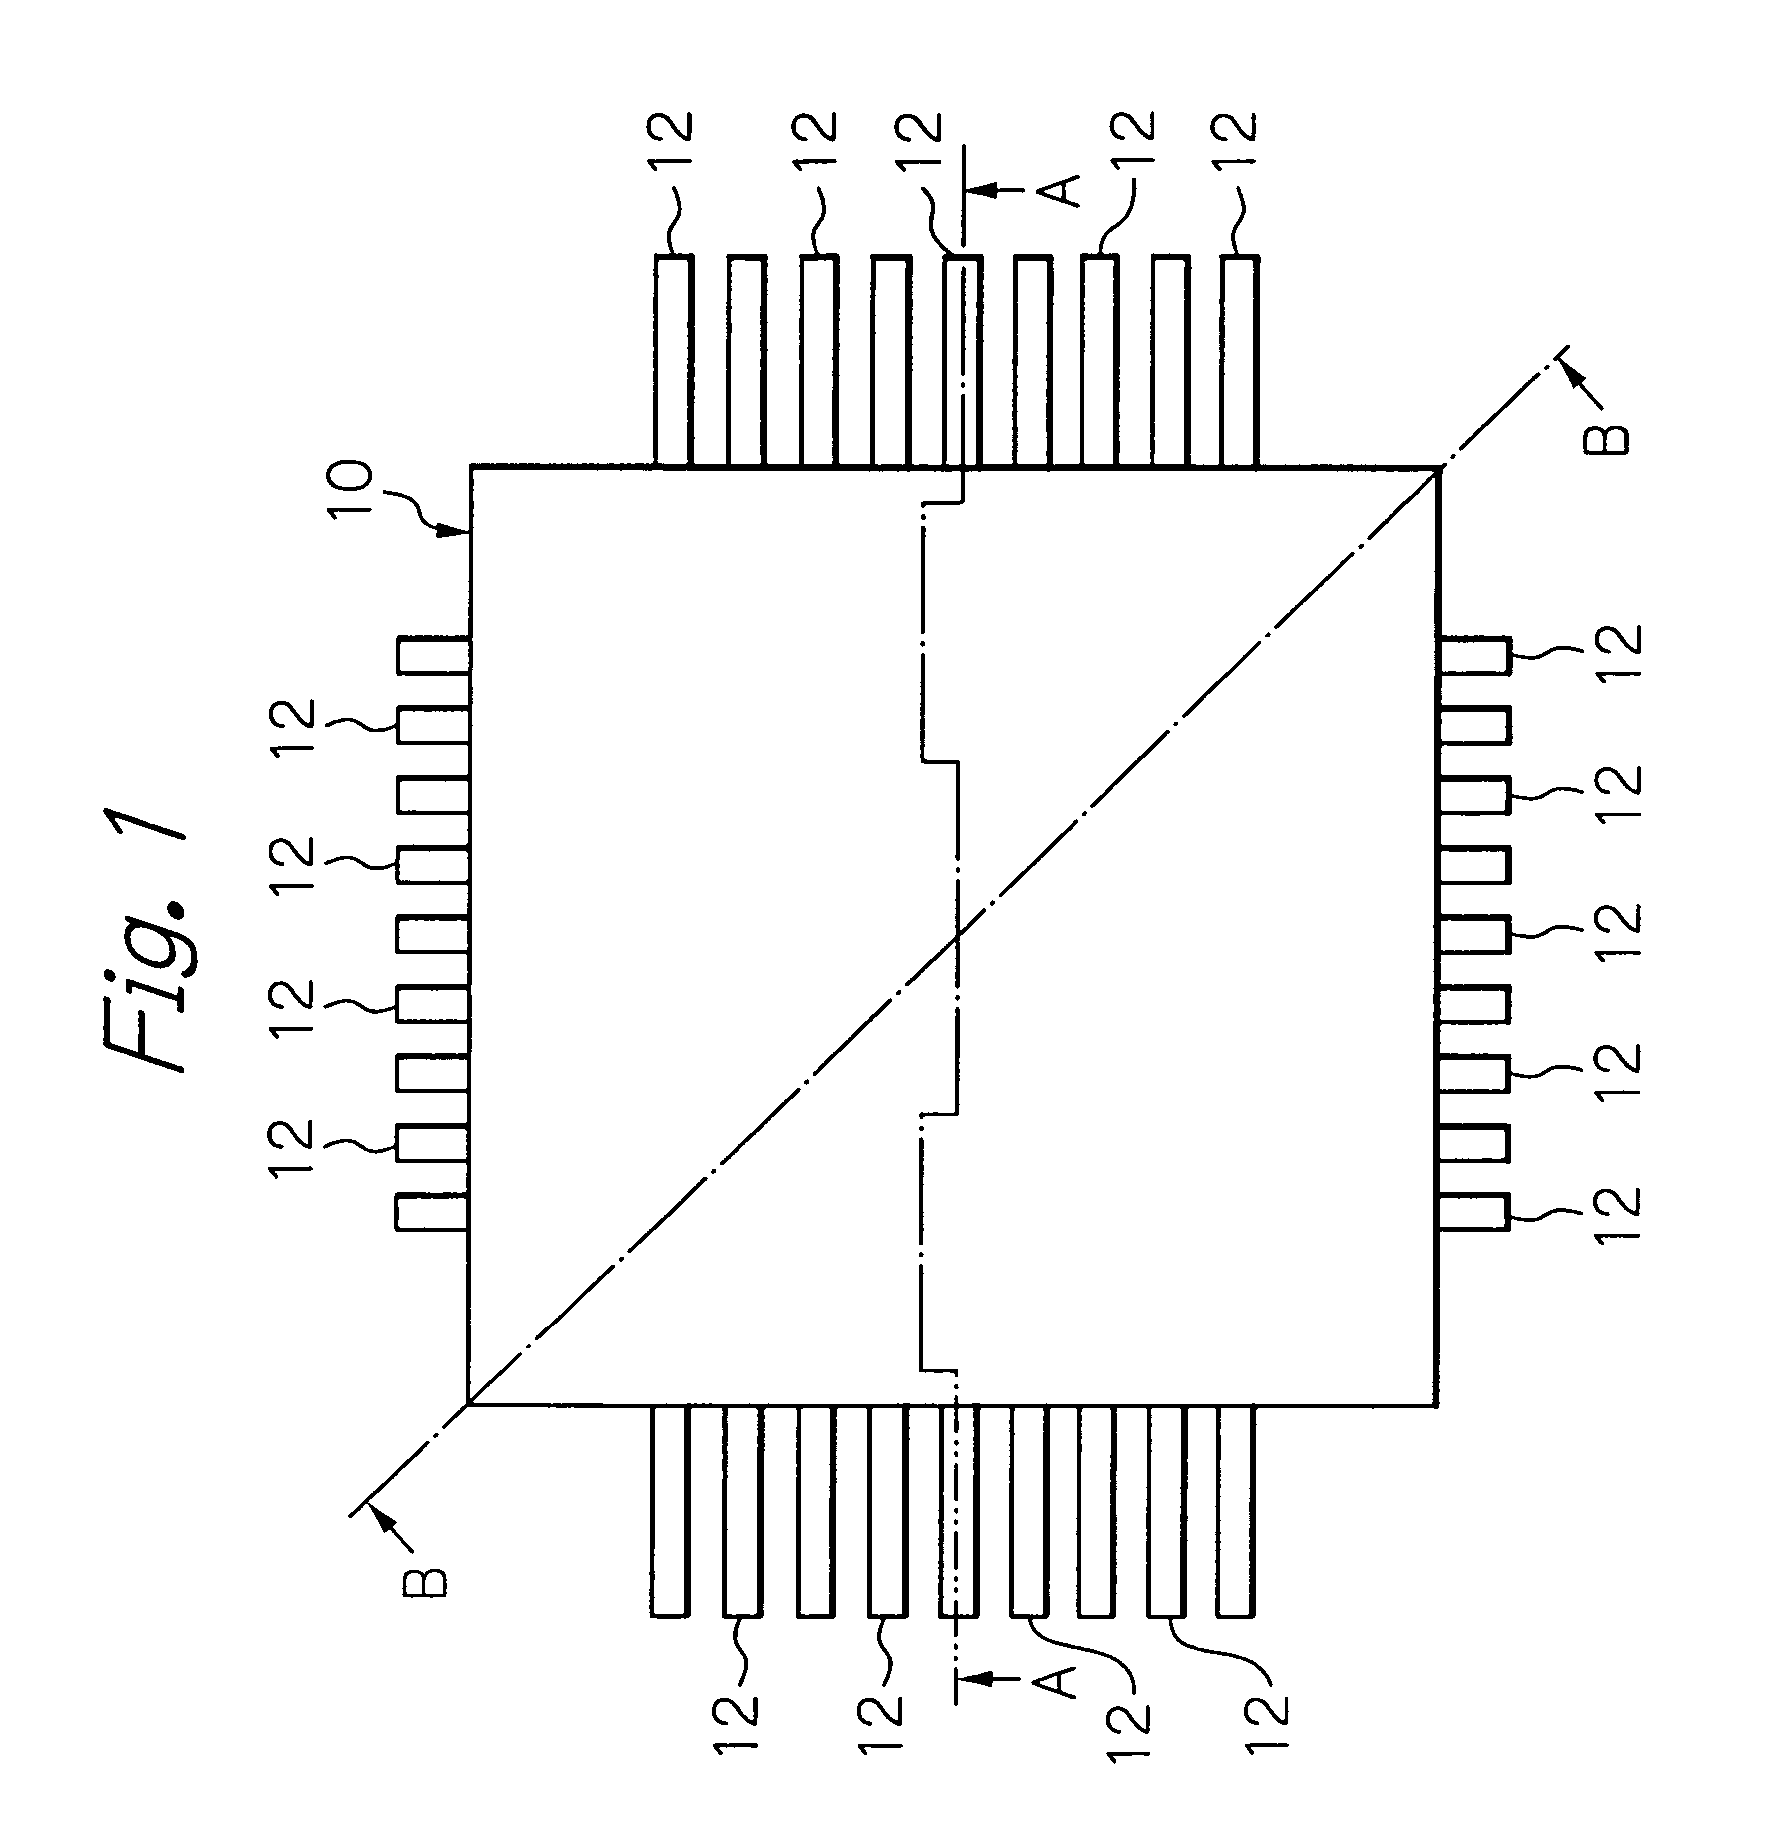 Resin-sealed-type semiconductor device, and production process for producing such semiconductor device